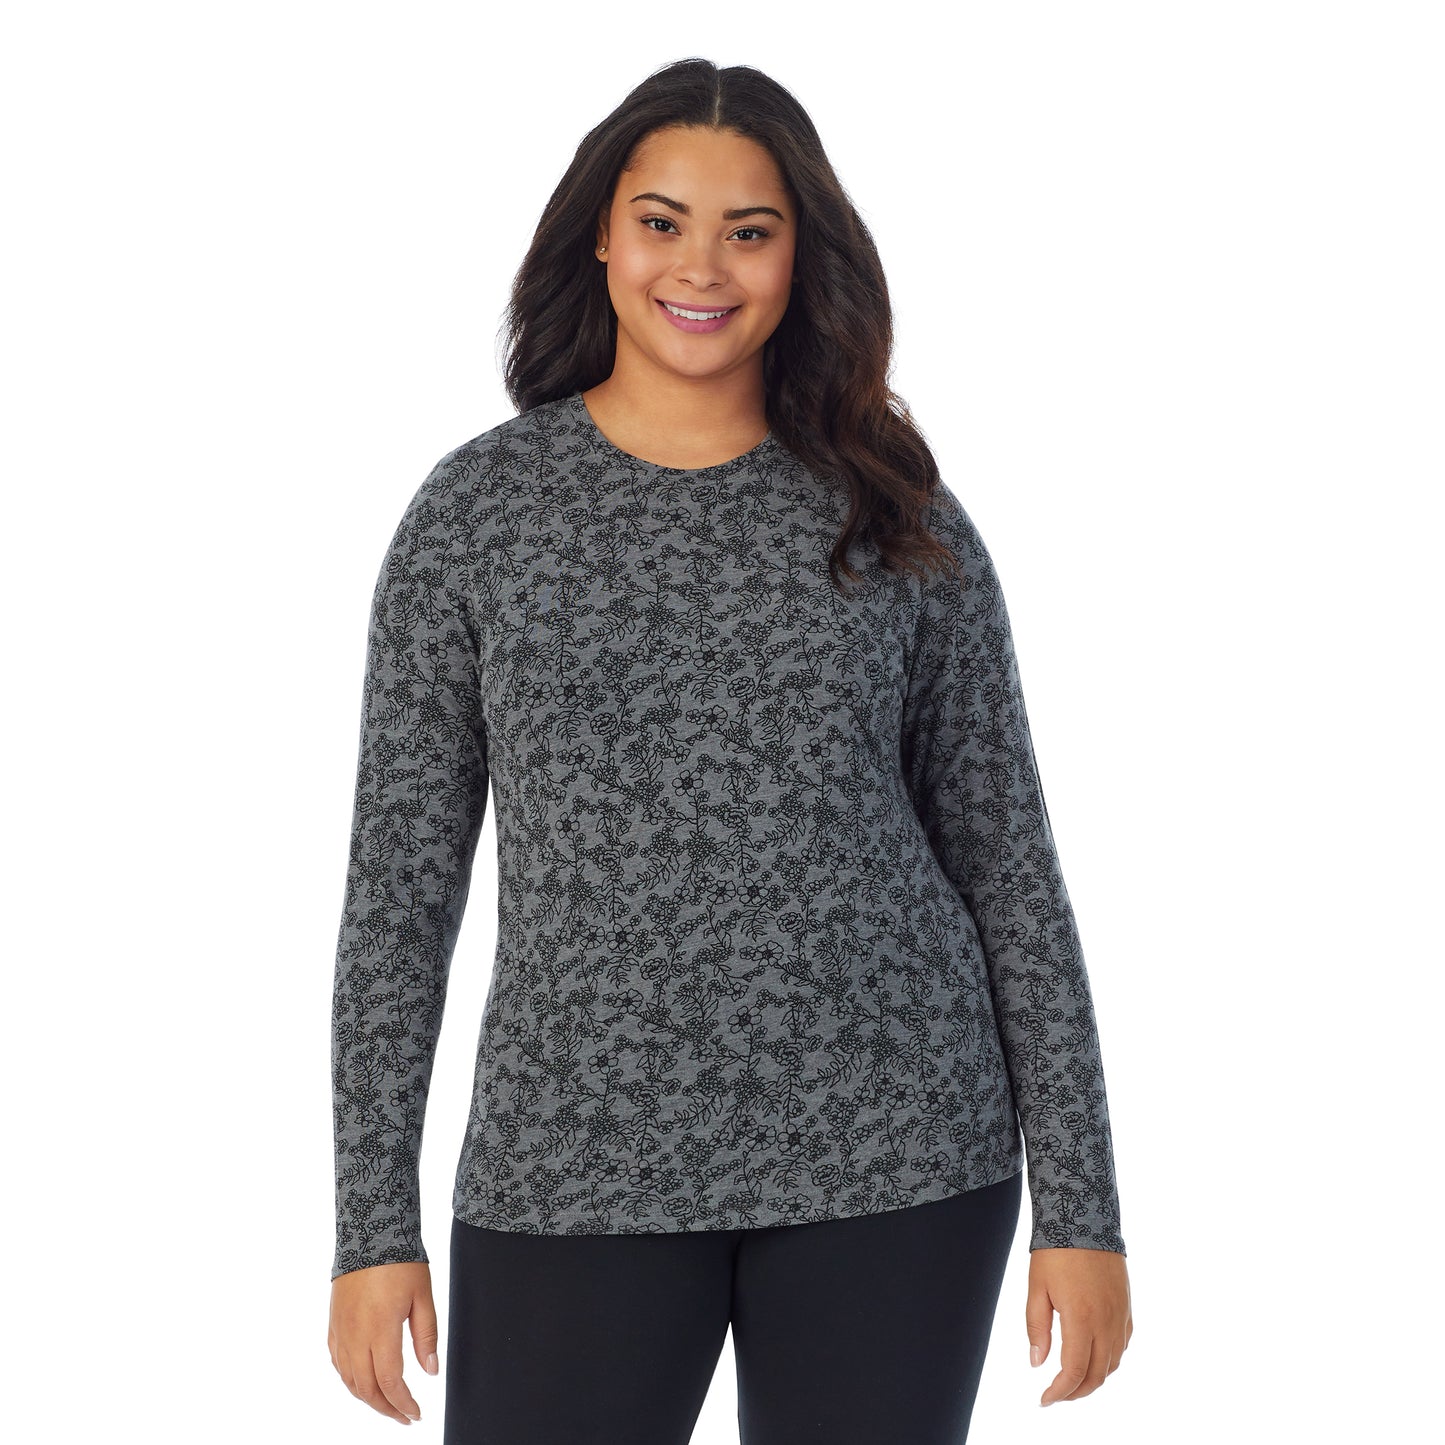 Heather Grey Floral; Model is wearing size 1X. She is 5'11", Bust 36", Waist 36.5", Hips 47.5".@A lady wearing a heather grey floral long sleeve stretch crew plus.